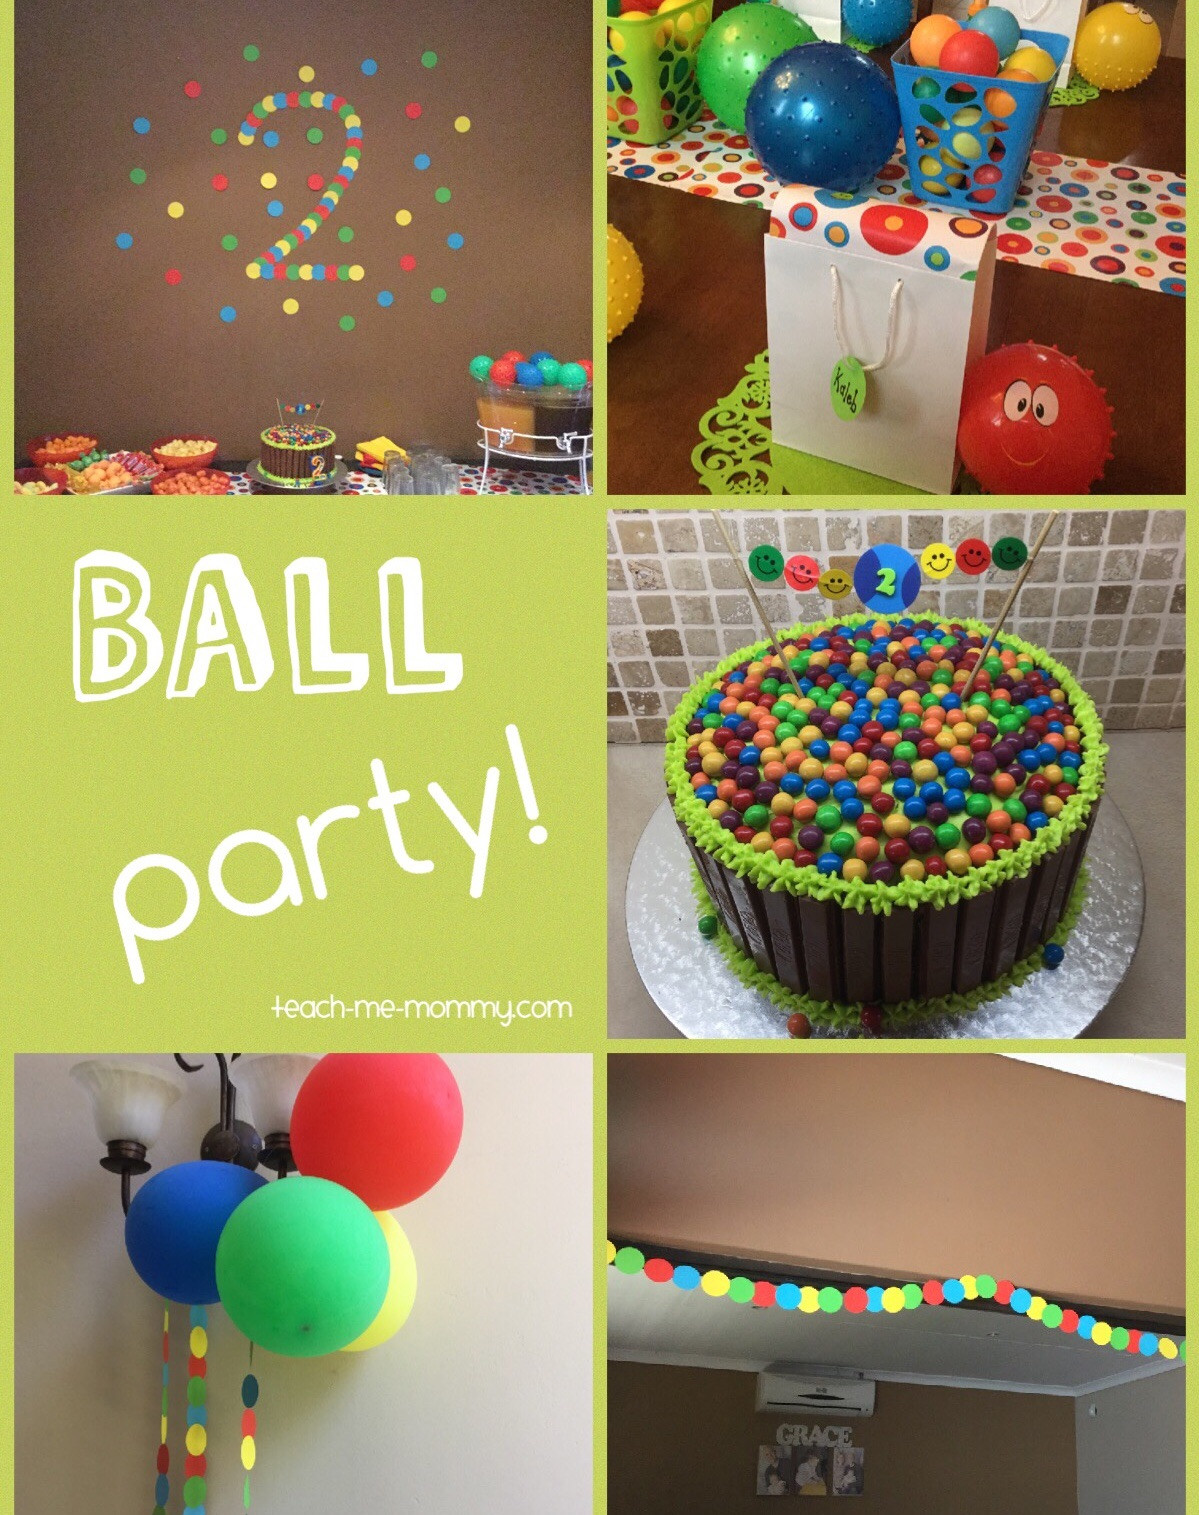 3 Year Old Boy Birthday Party Ideas
 Ball Themed Party for a 2 Year Old Teach Me Mommy